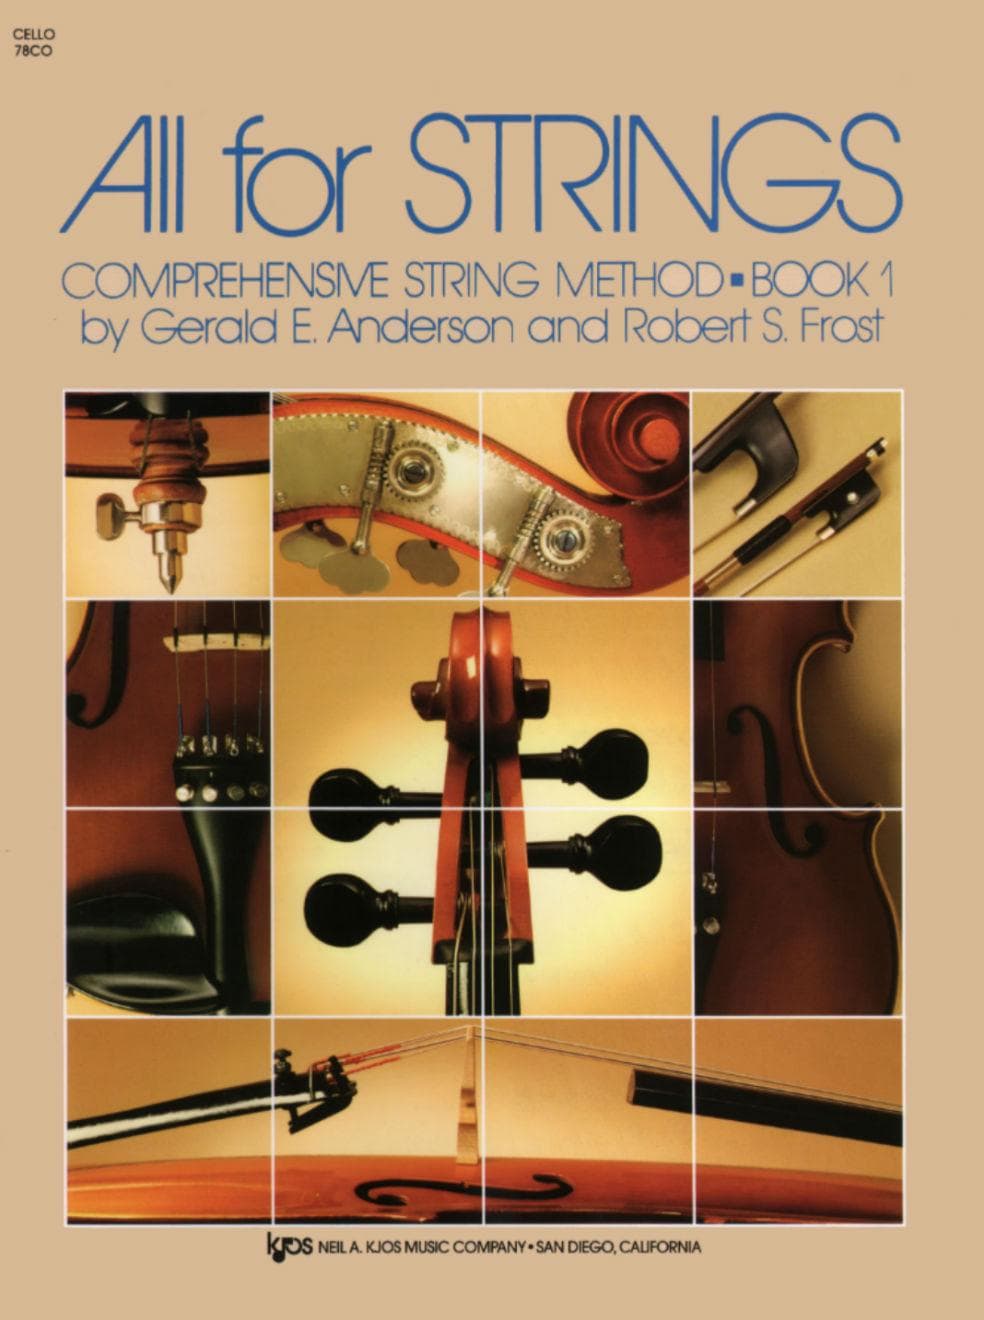 All For Strings Comprehensive String Method - Book 1 for Cello by Gerald E Anderson and Robert S Frost